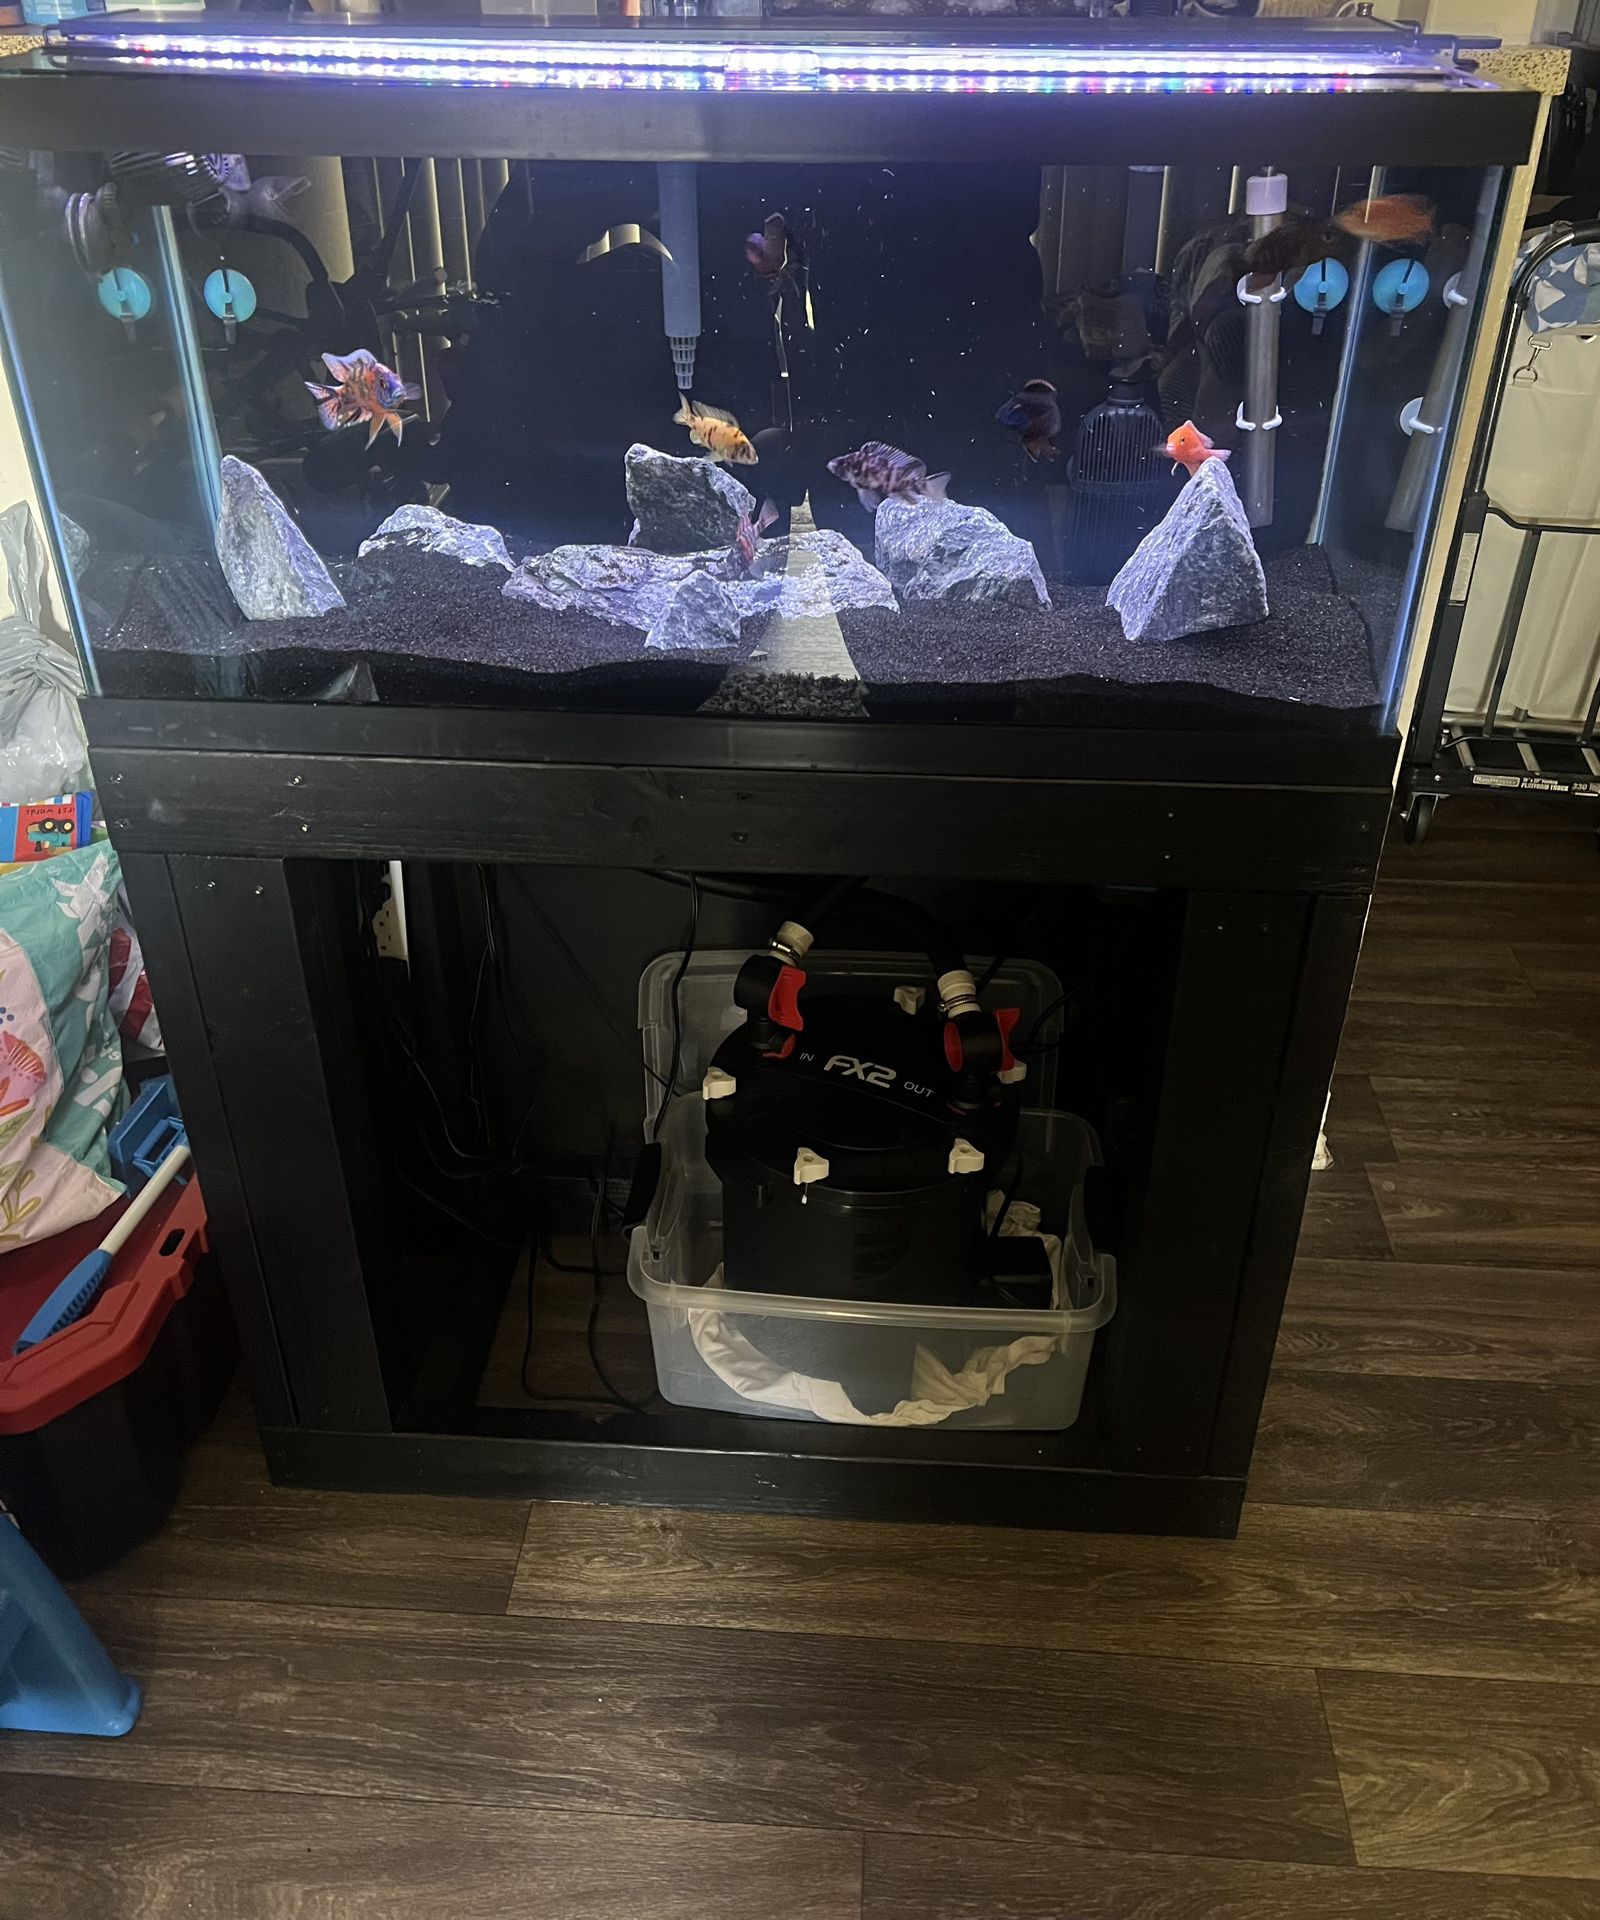 40 gallon/ W Stand  AquaClear 110 / Glass top